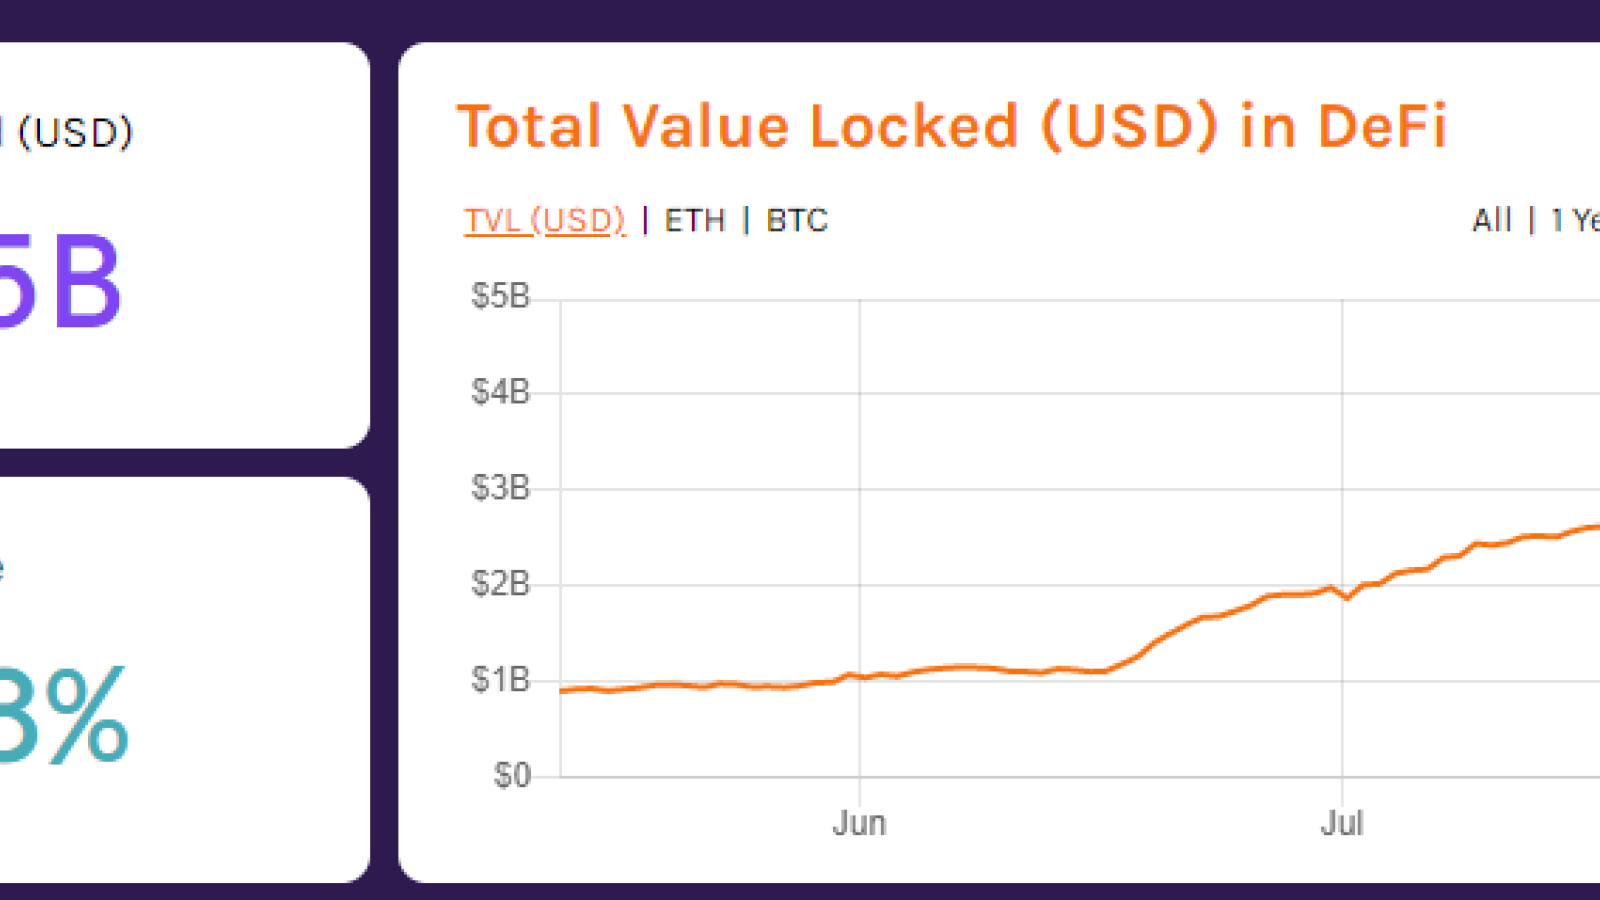 The total value locked in DeFi on Ethereum.